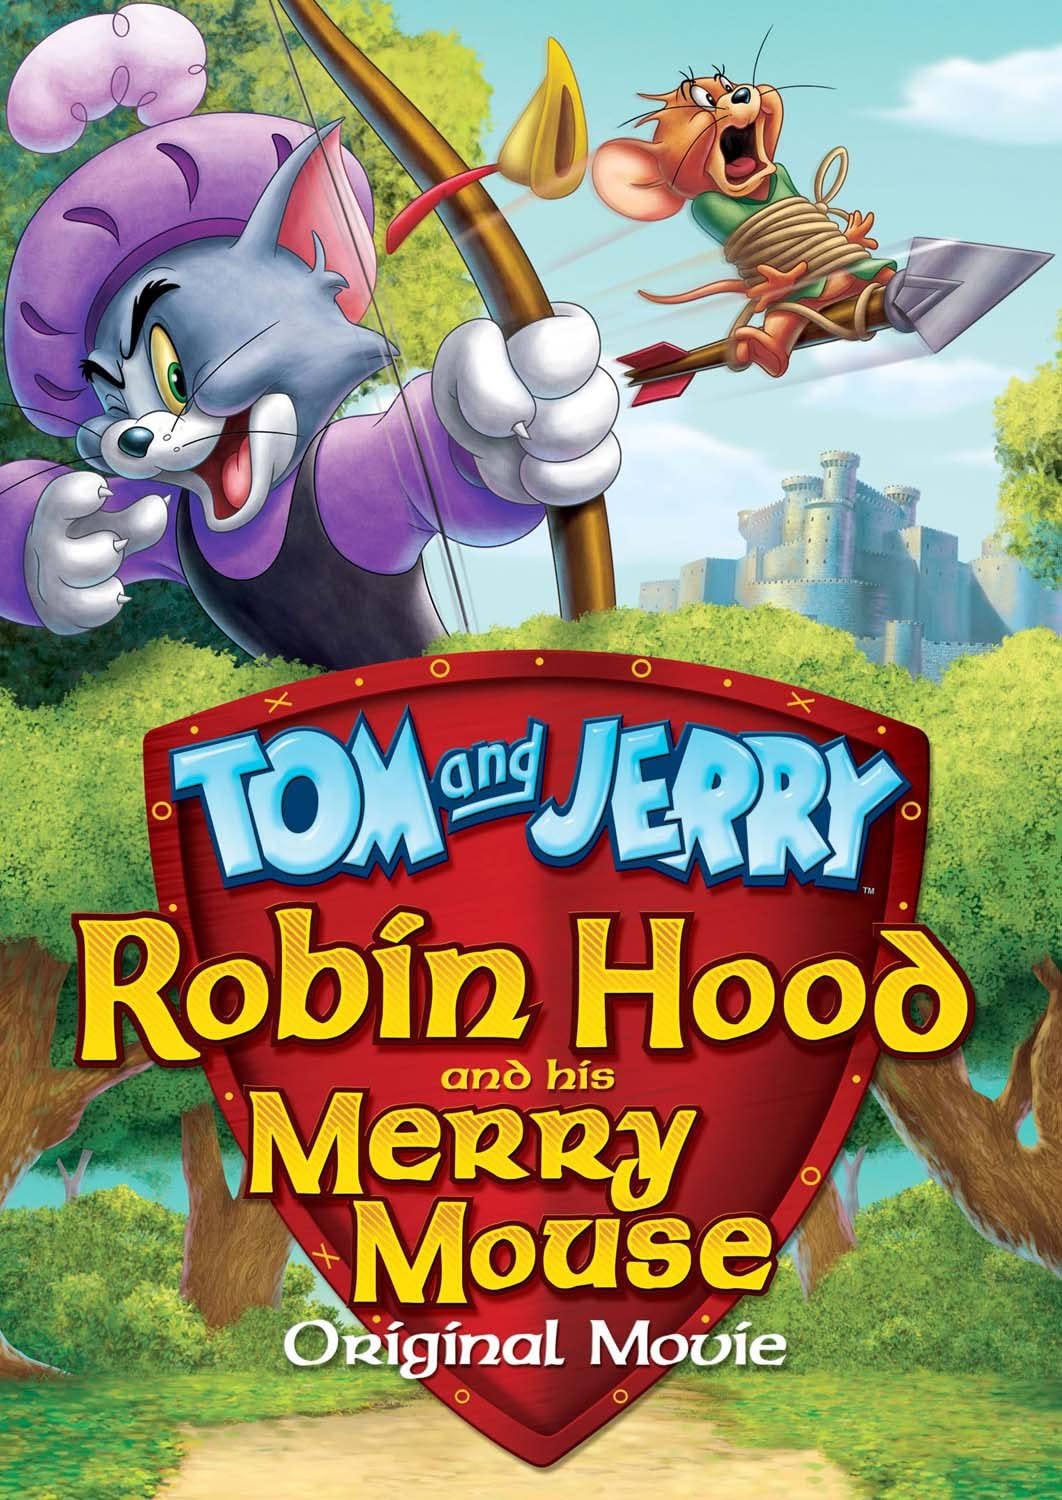 Tom And Jerry: Robin Hood and His Merry Mouse [2012] - Family/Musical [DVD]